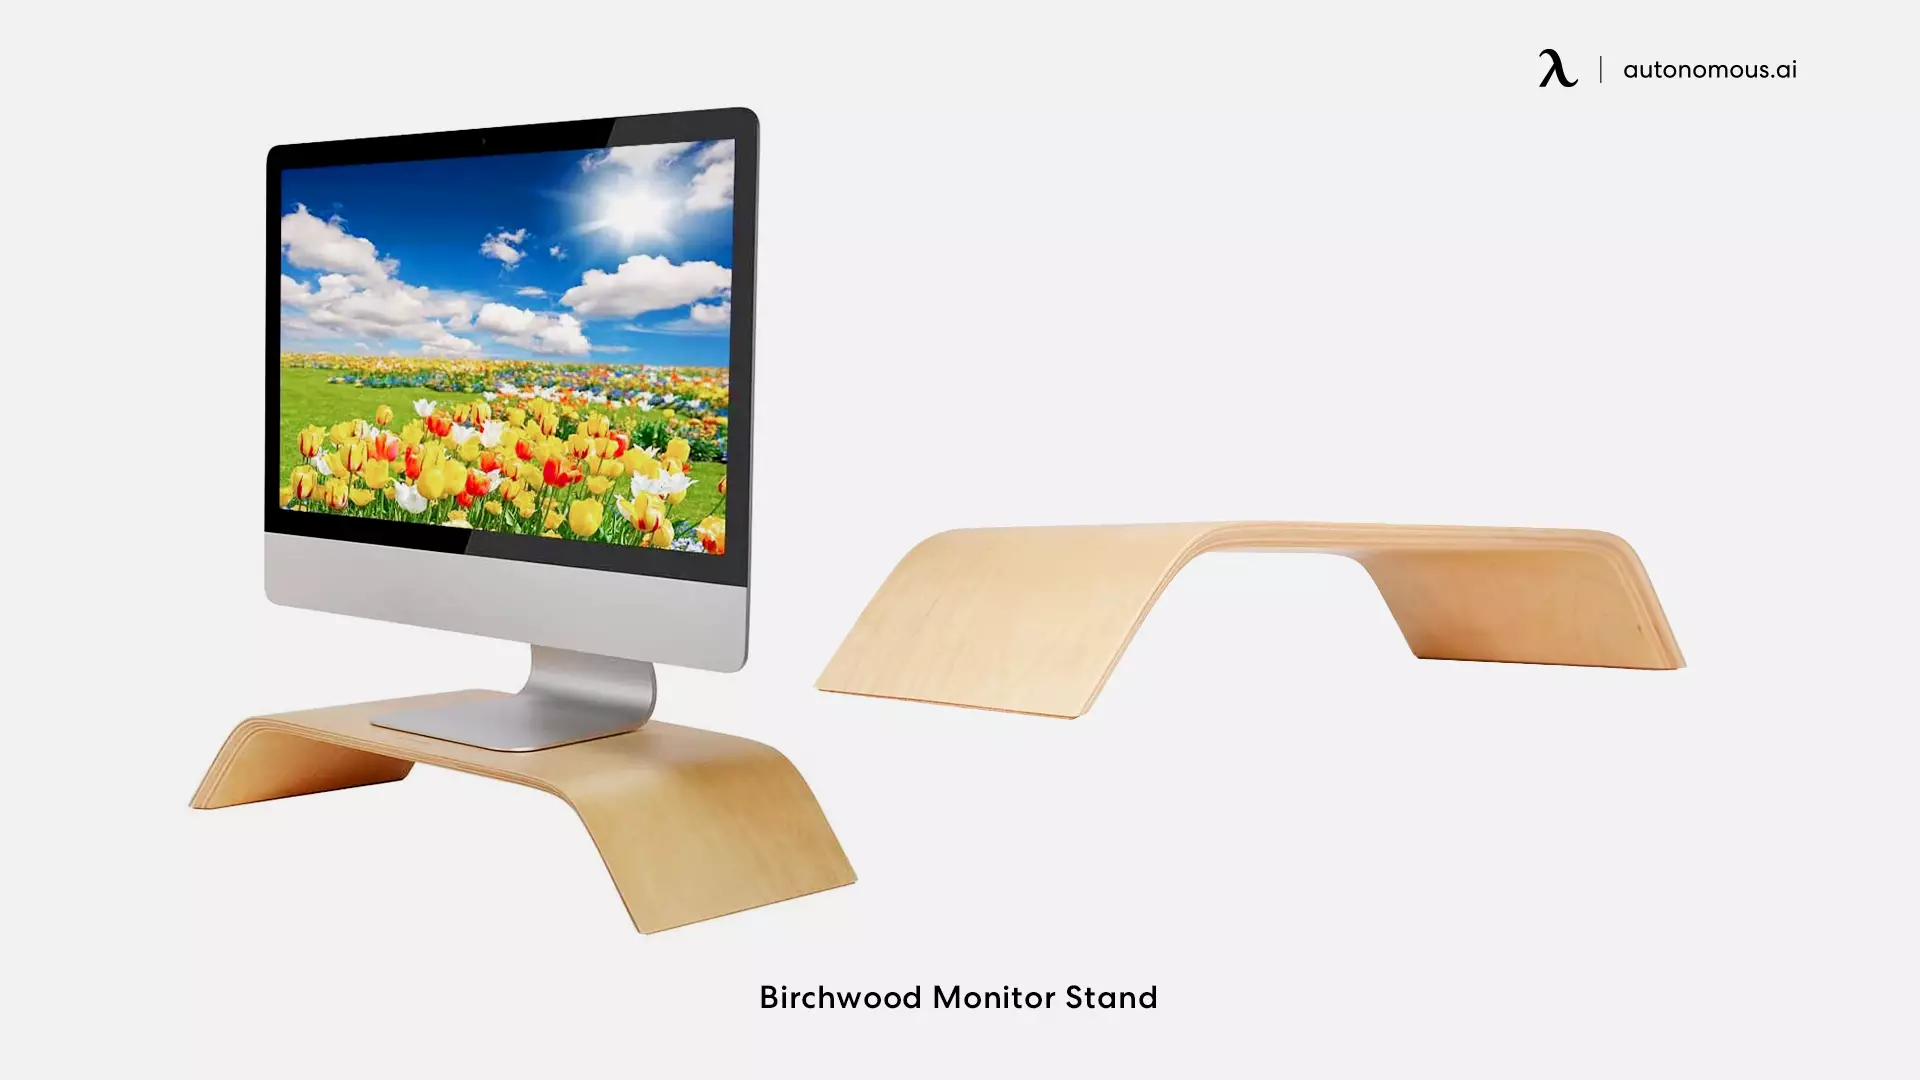 Birchwood Monitor Stand Father's Day sales